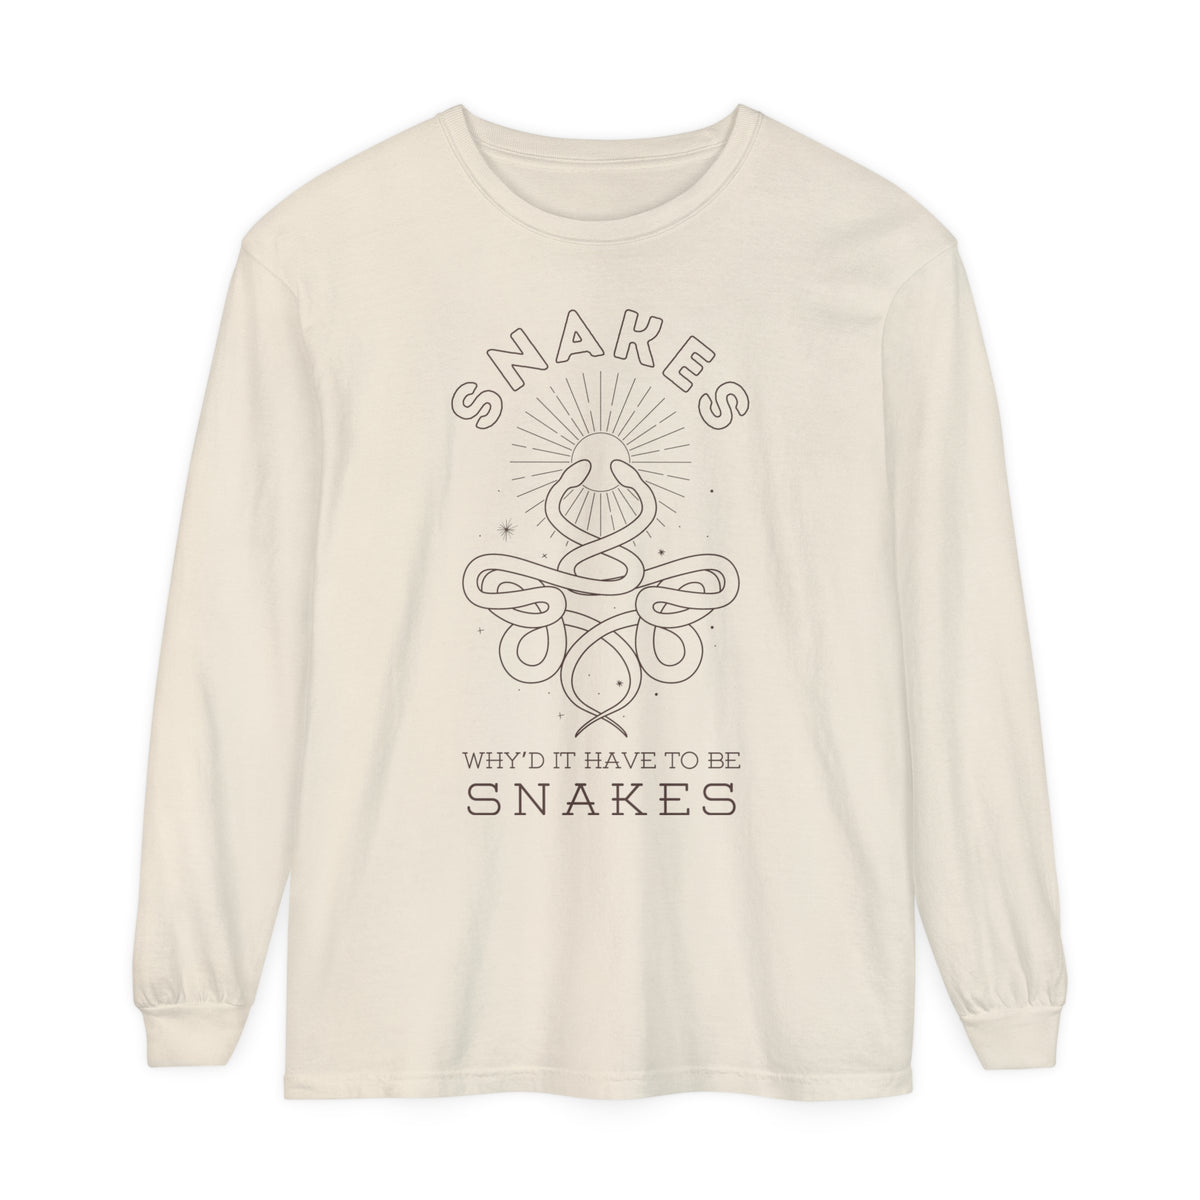 Why'd It Have To Be Snakes Comfort Colors Unisex Garment-dyed Long Sleeve T-Shirt